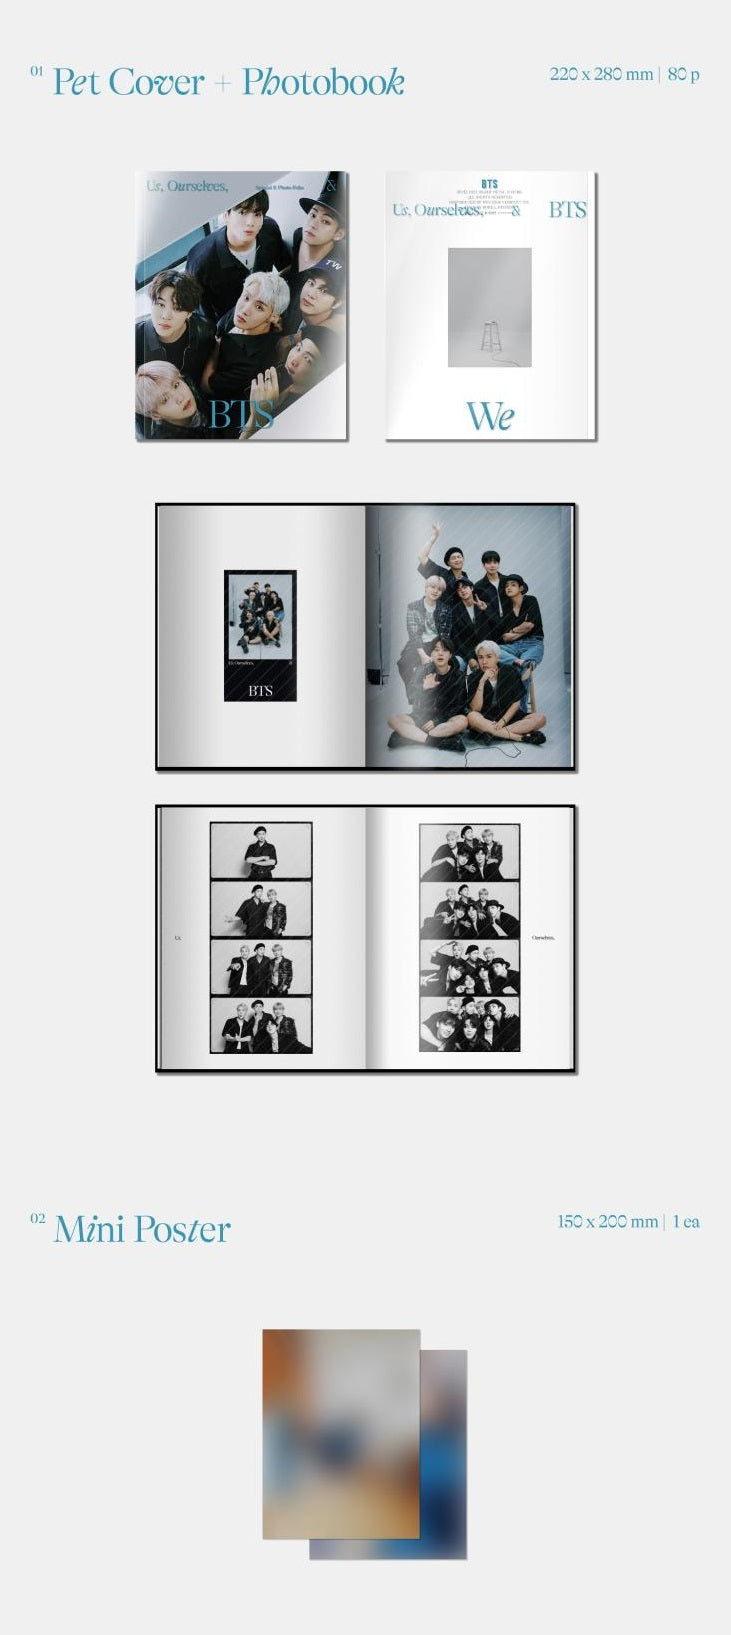 BTS - SPECIAL 8 PHOTO FOLIO US OURSELVES AND BTS WE SET